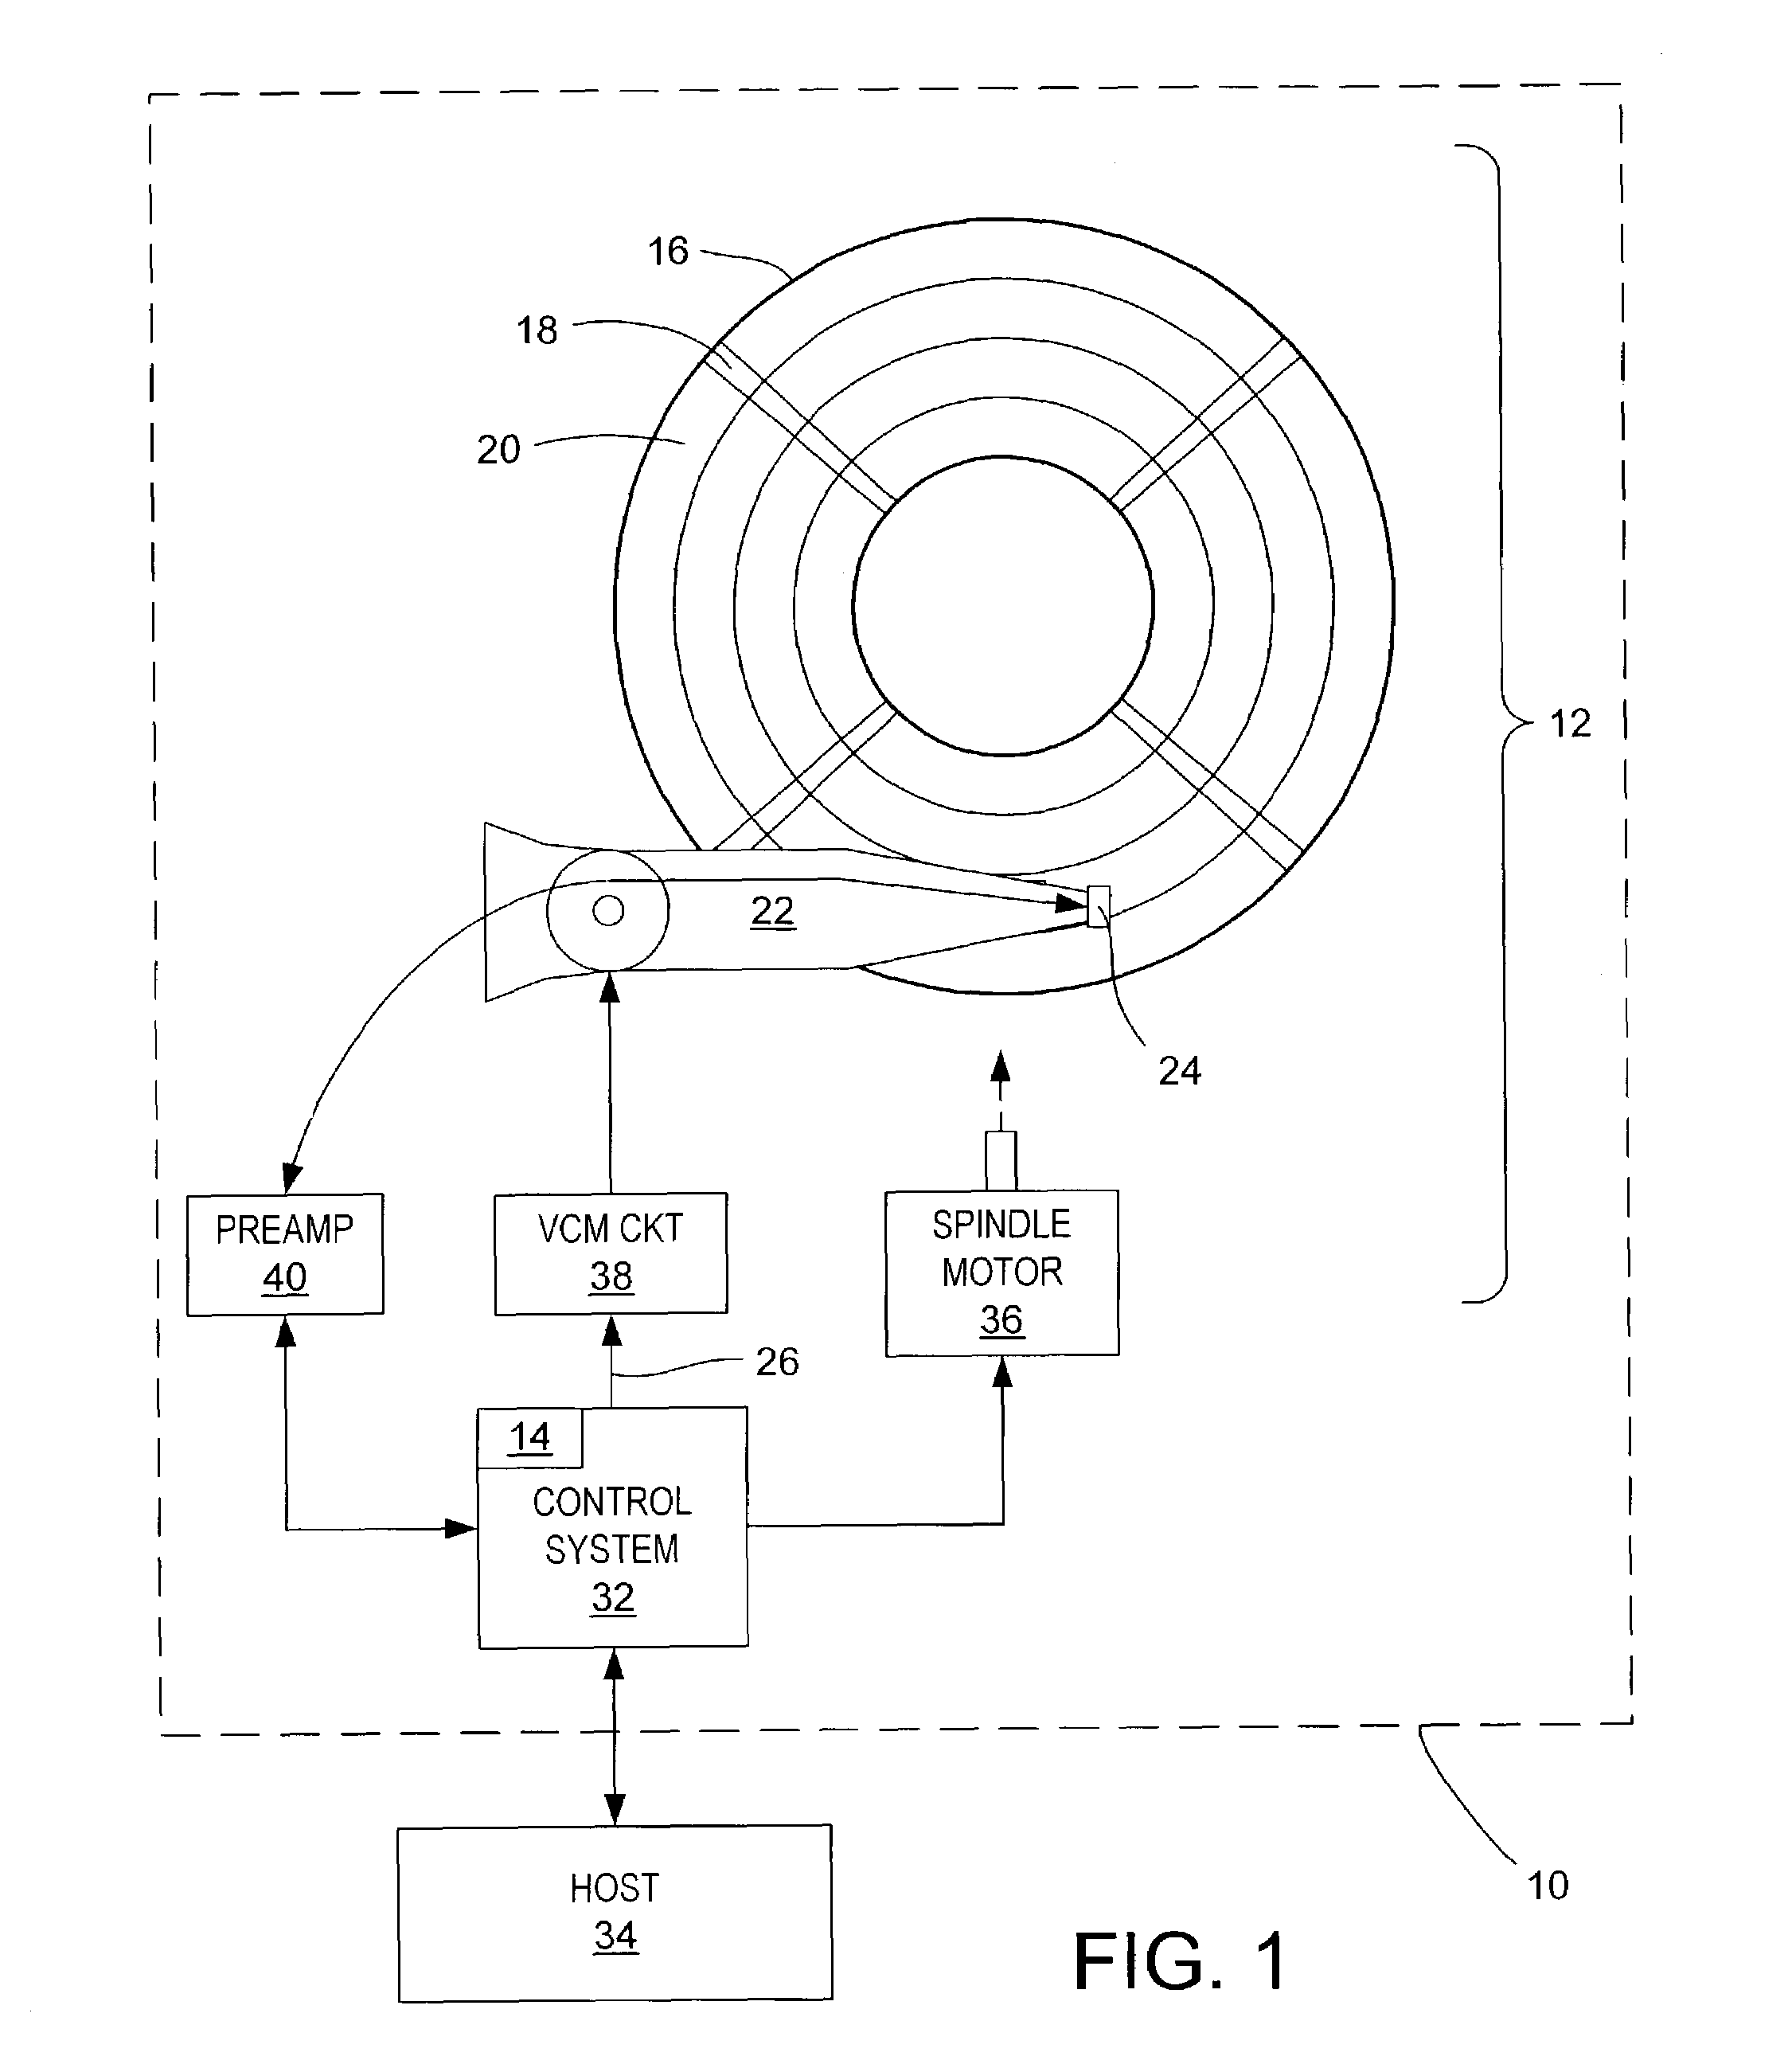 Disk drive having internal data structures for efficiently storing repeatable runout cancellation information